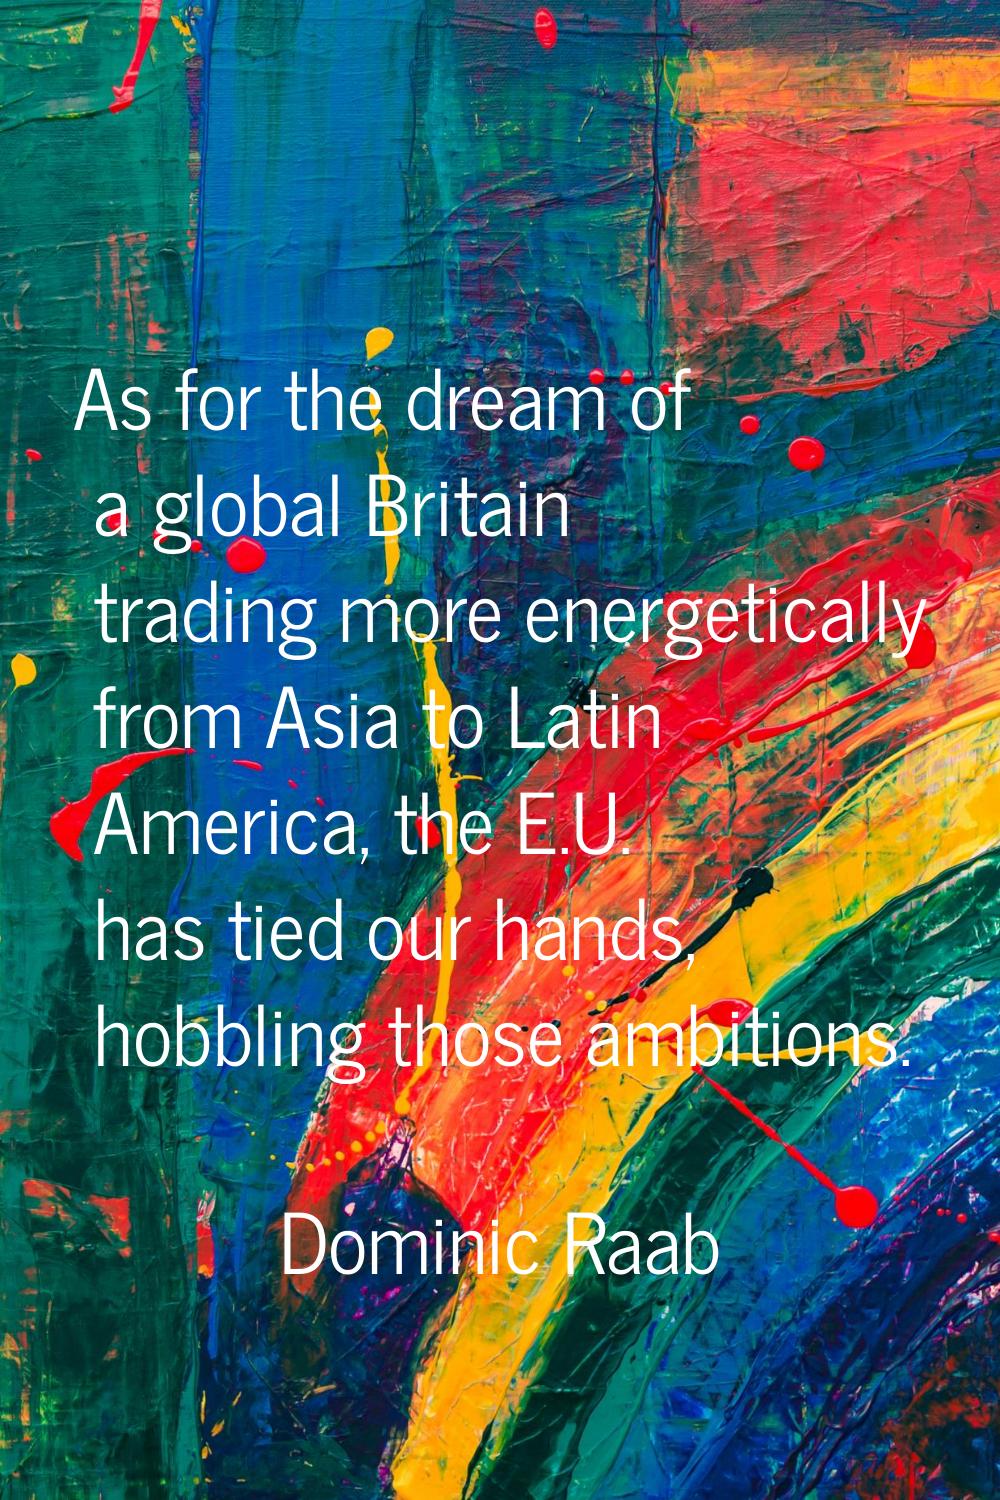 As for the dream of a global Britain trading more energetically from Asia to Latin America, the E.U